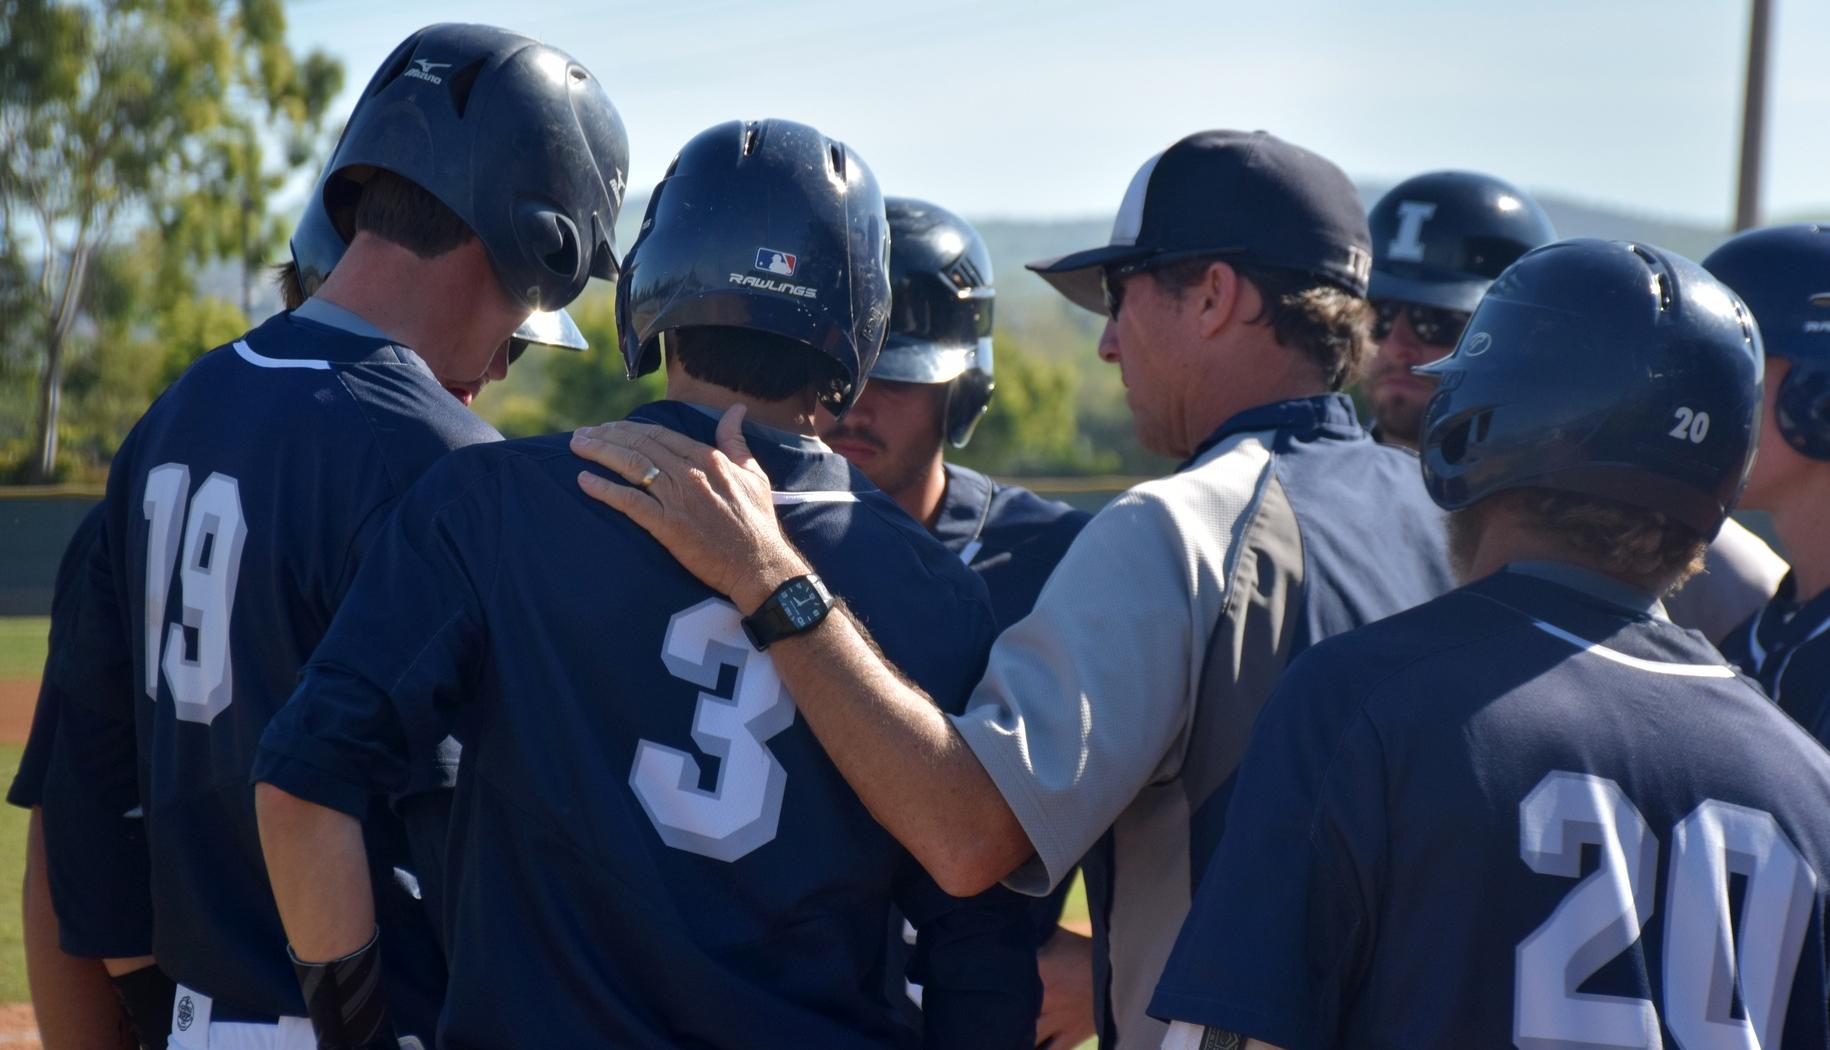 Baseball team ranked No. 12 in So. Cal. again in latest poll